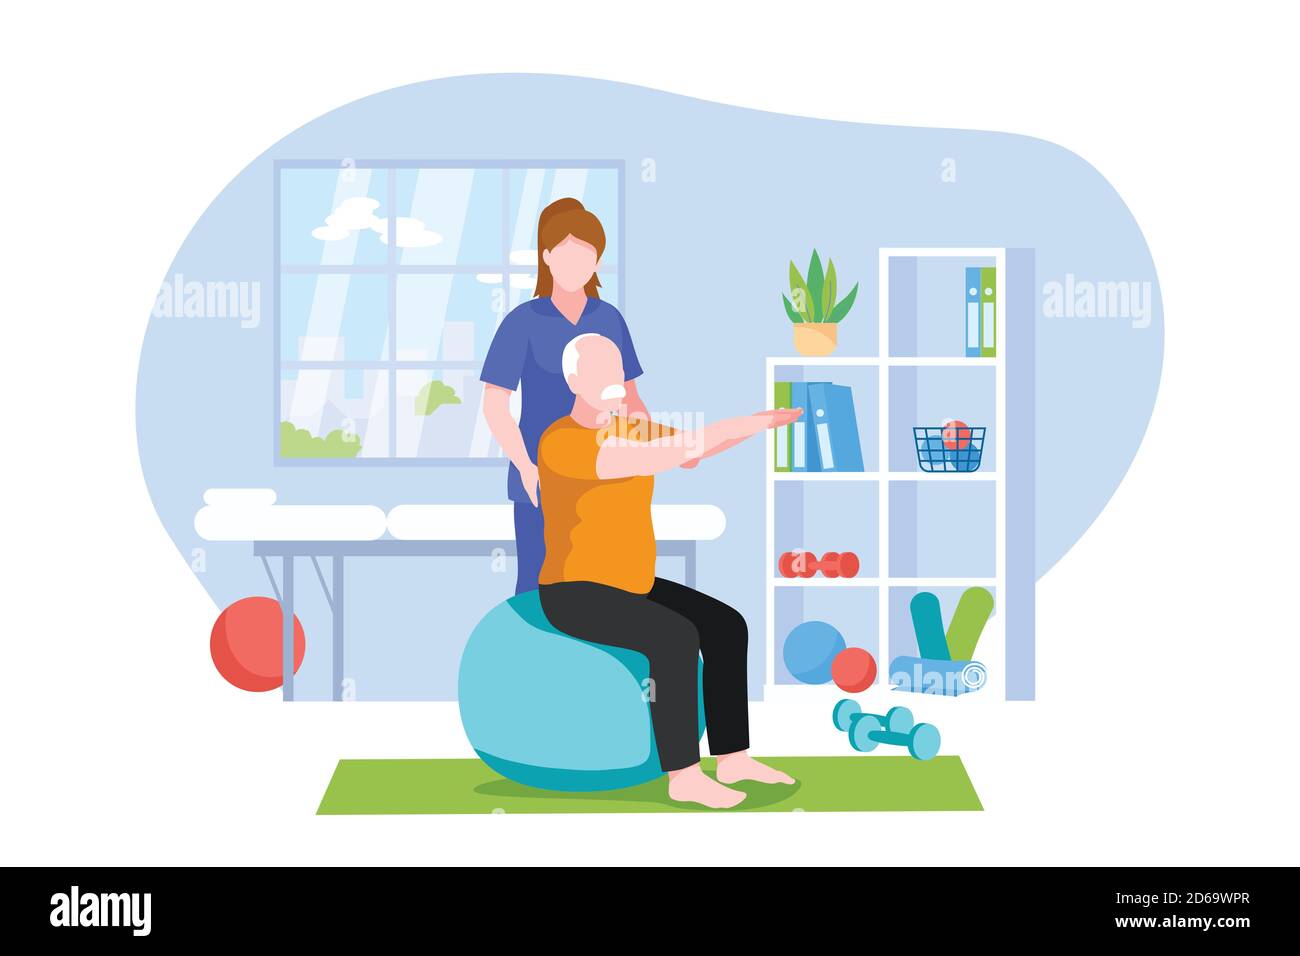 Physiotherapist or rehabilitologist doctor rehabilitates elderly patient. Physiotherapy rehab, injury recovery concept. Vector flat cartoon illustrati Stock Vector